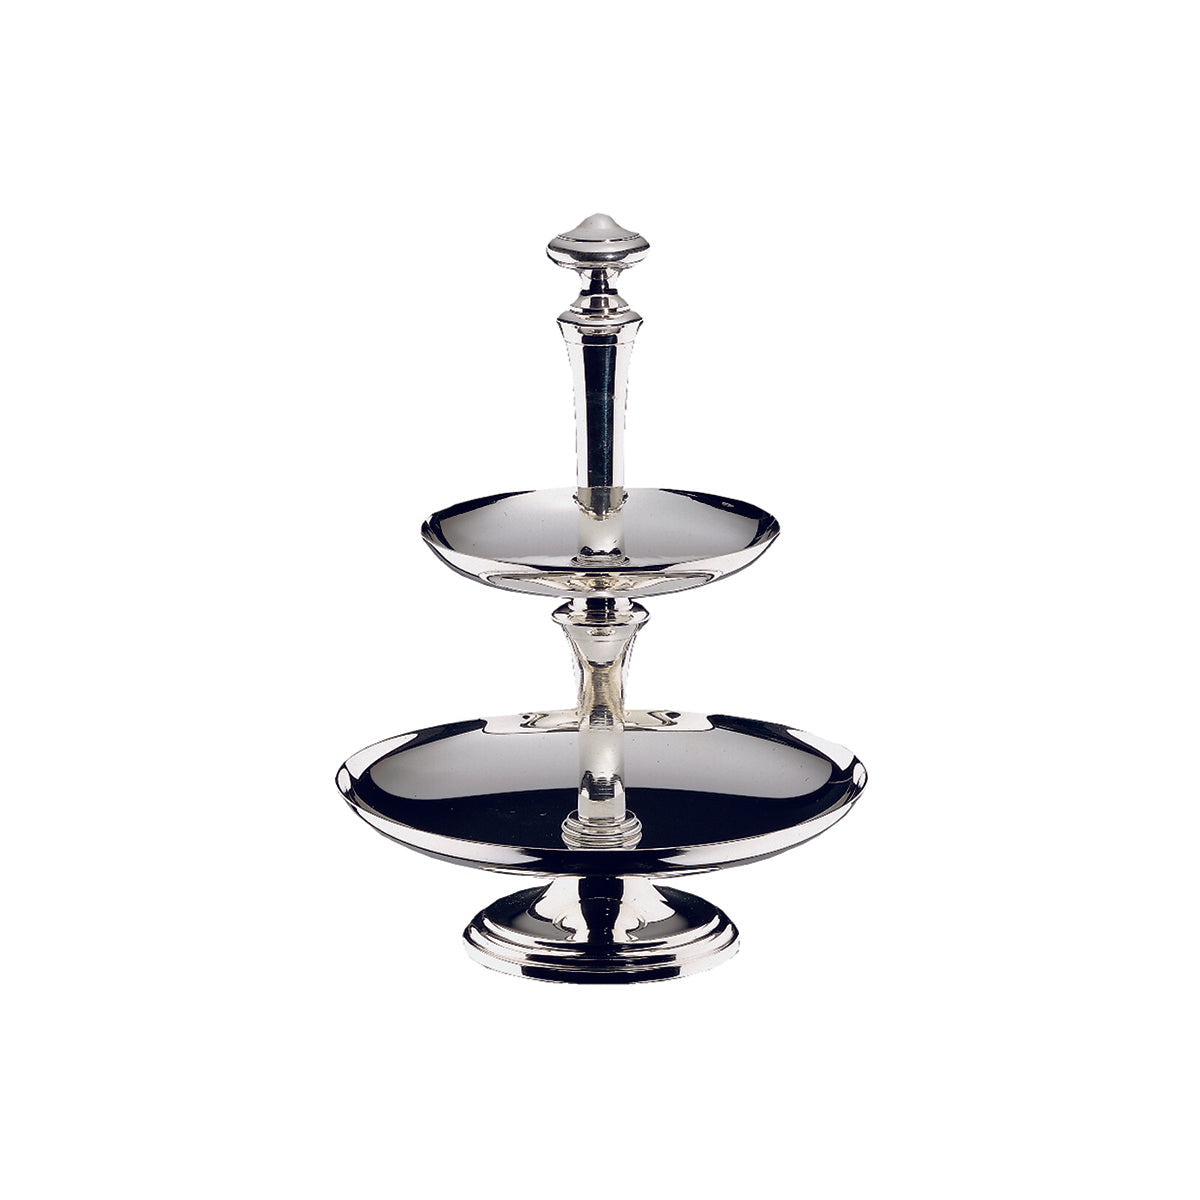 19.6907.6440 WMF Classic 2-Tier Pastry Stand 155x215mm Silverplated Tomkin Australia Hospitality Supplies